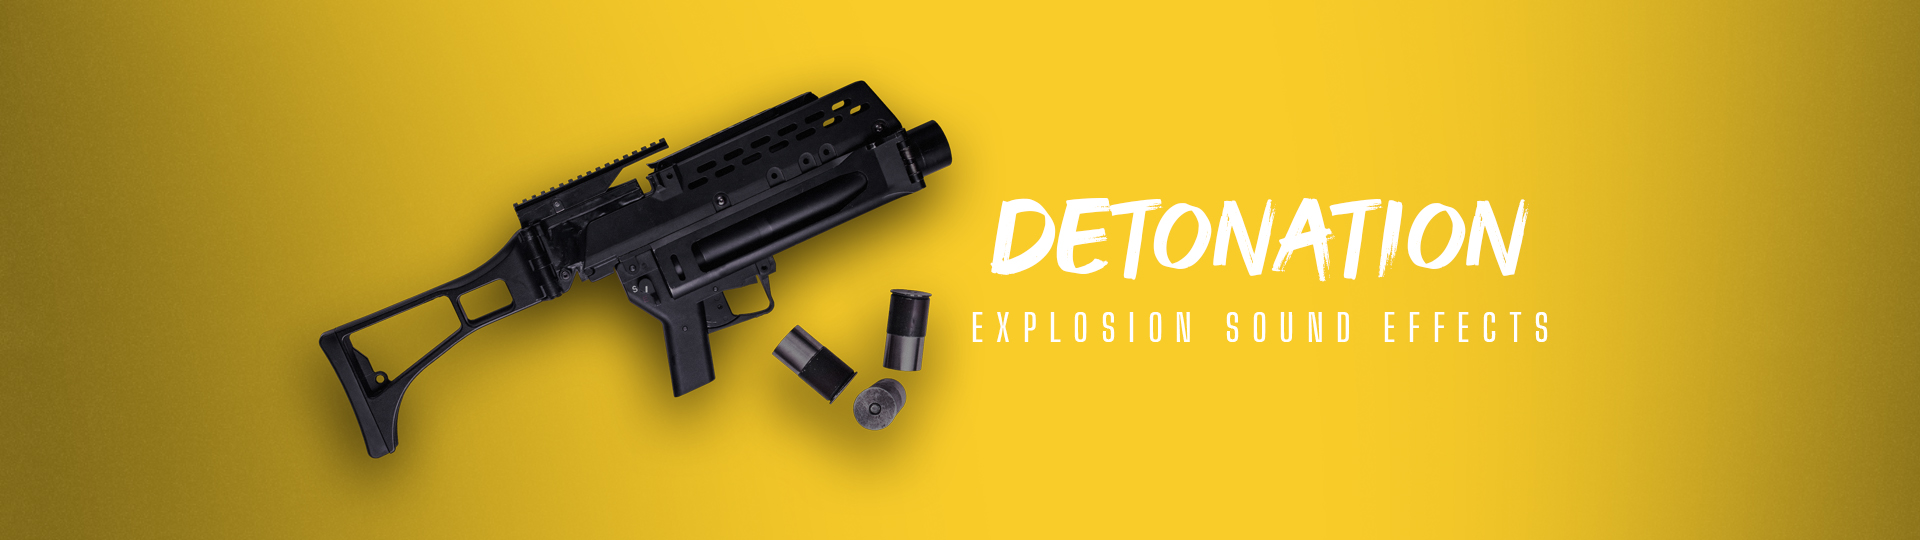 Detonation, Explosion Sound Effects released at Bluezone Corporation